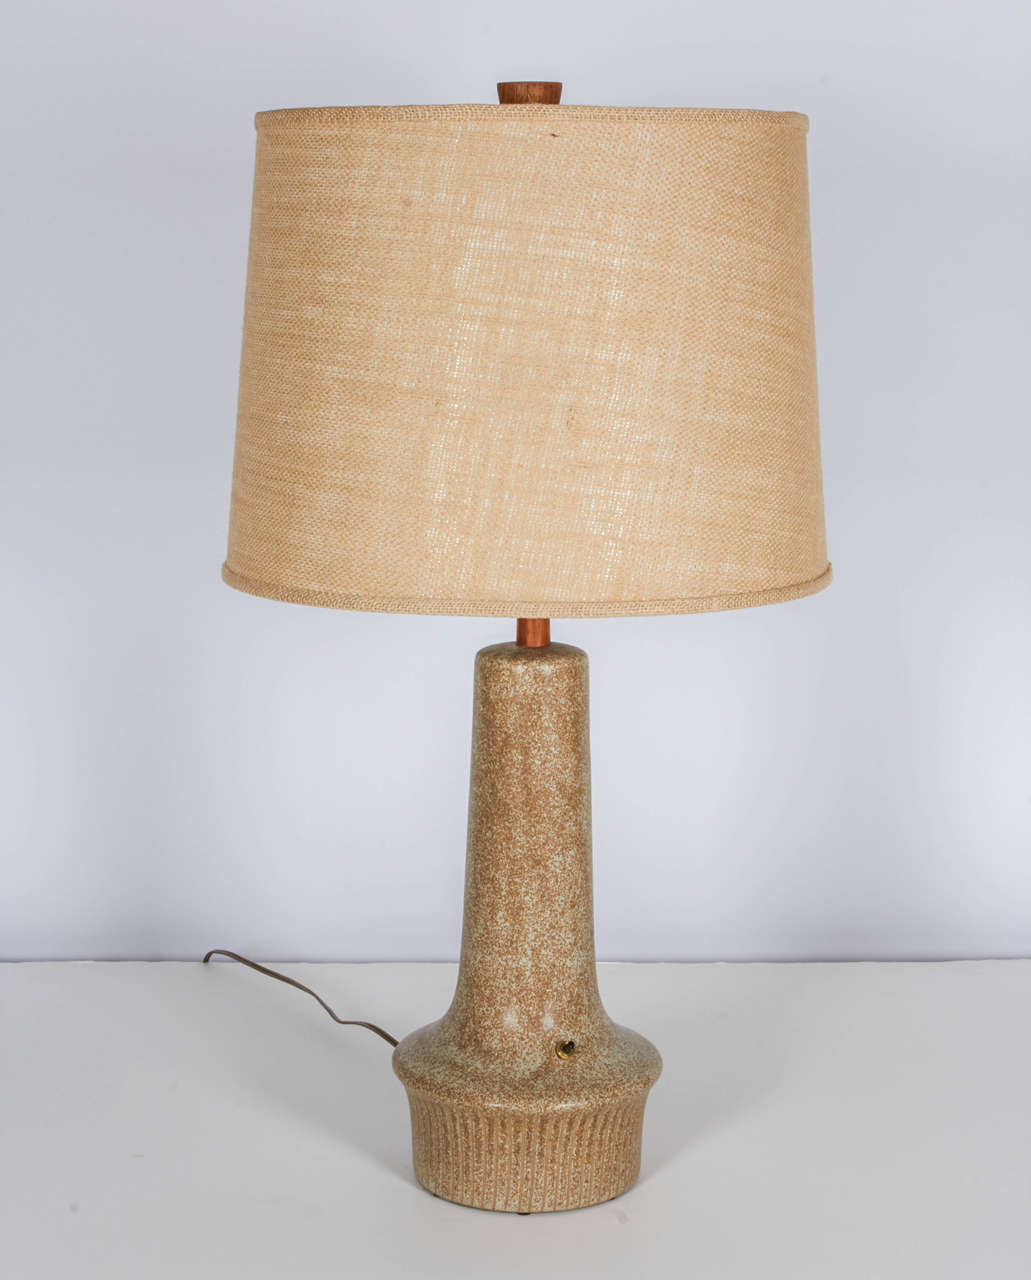 Very handsome pair of studio pottery lamps by Jane and Gordon Martz. They have a wonderful form and finish. An unusual feature are the original three way switches at the bases. The lamps are detailed with the Martz signature walnut stems topped with